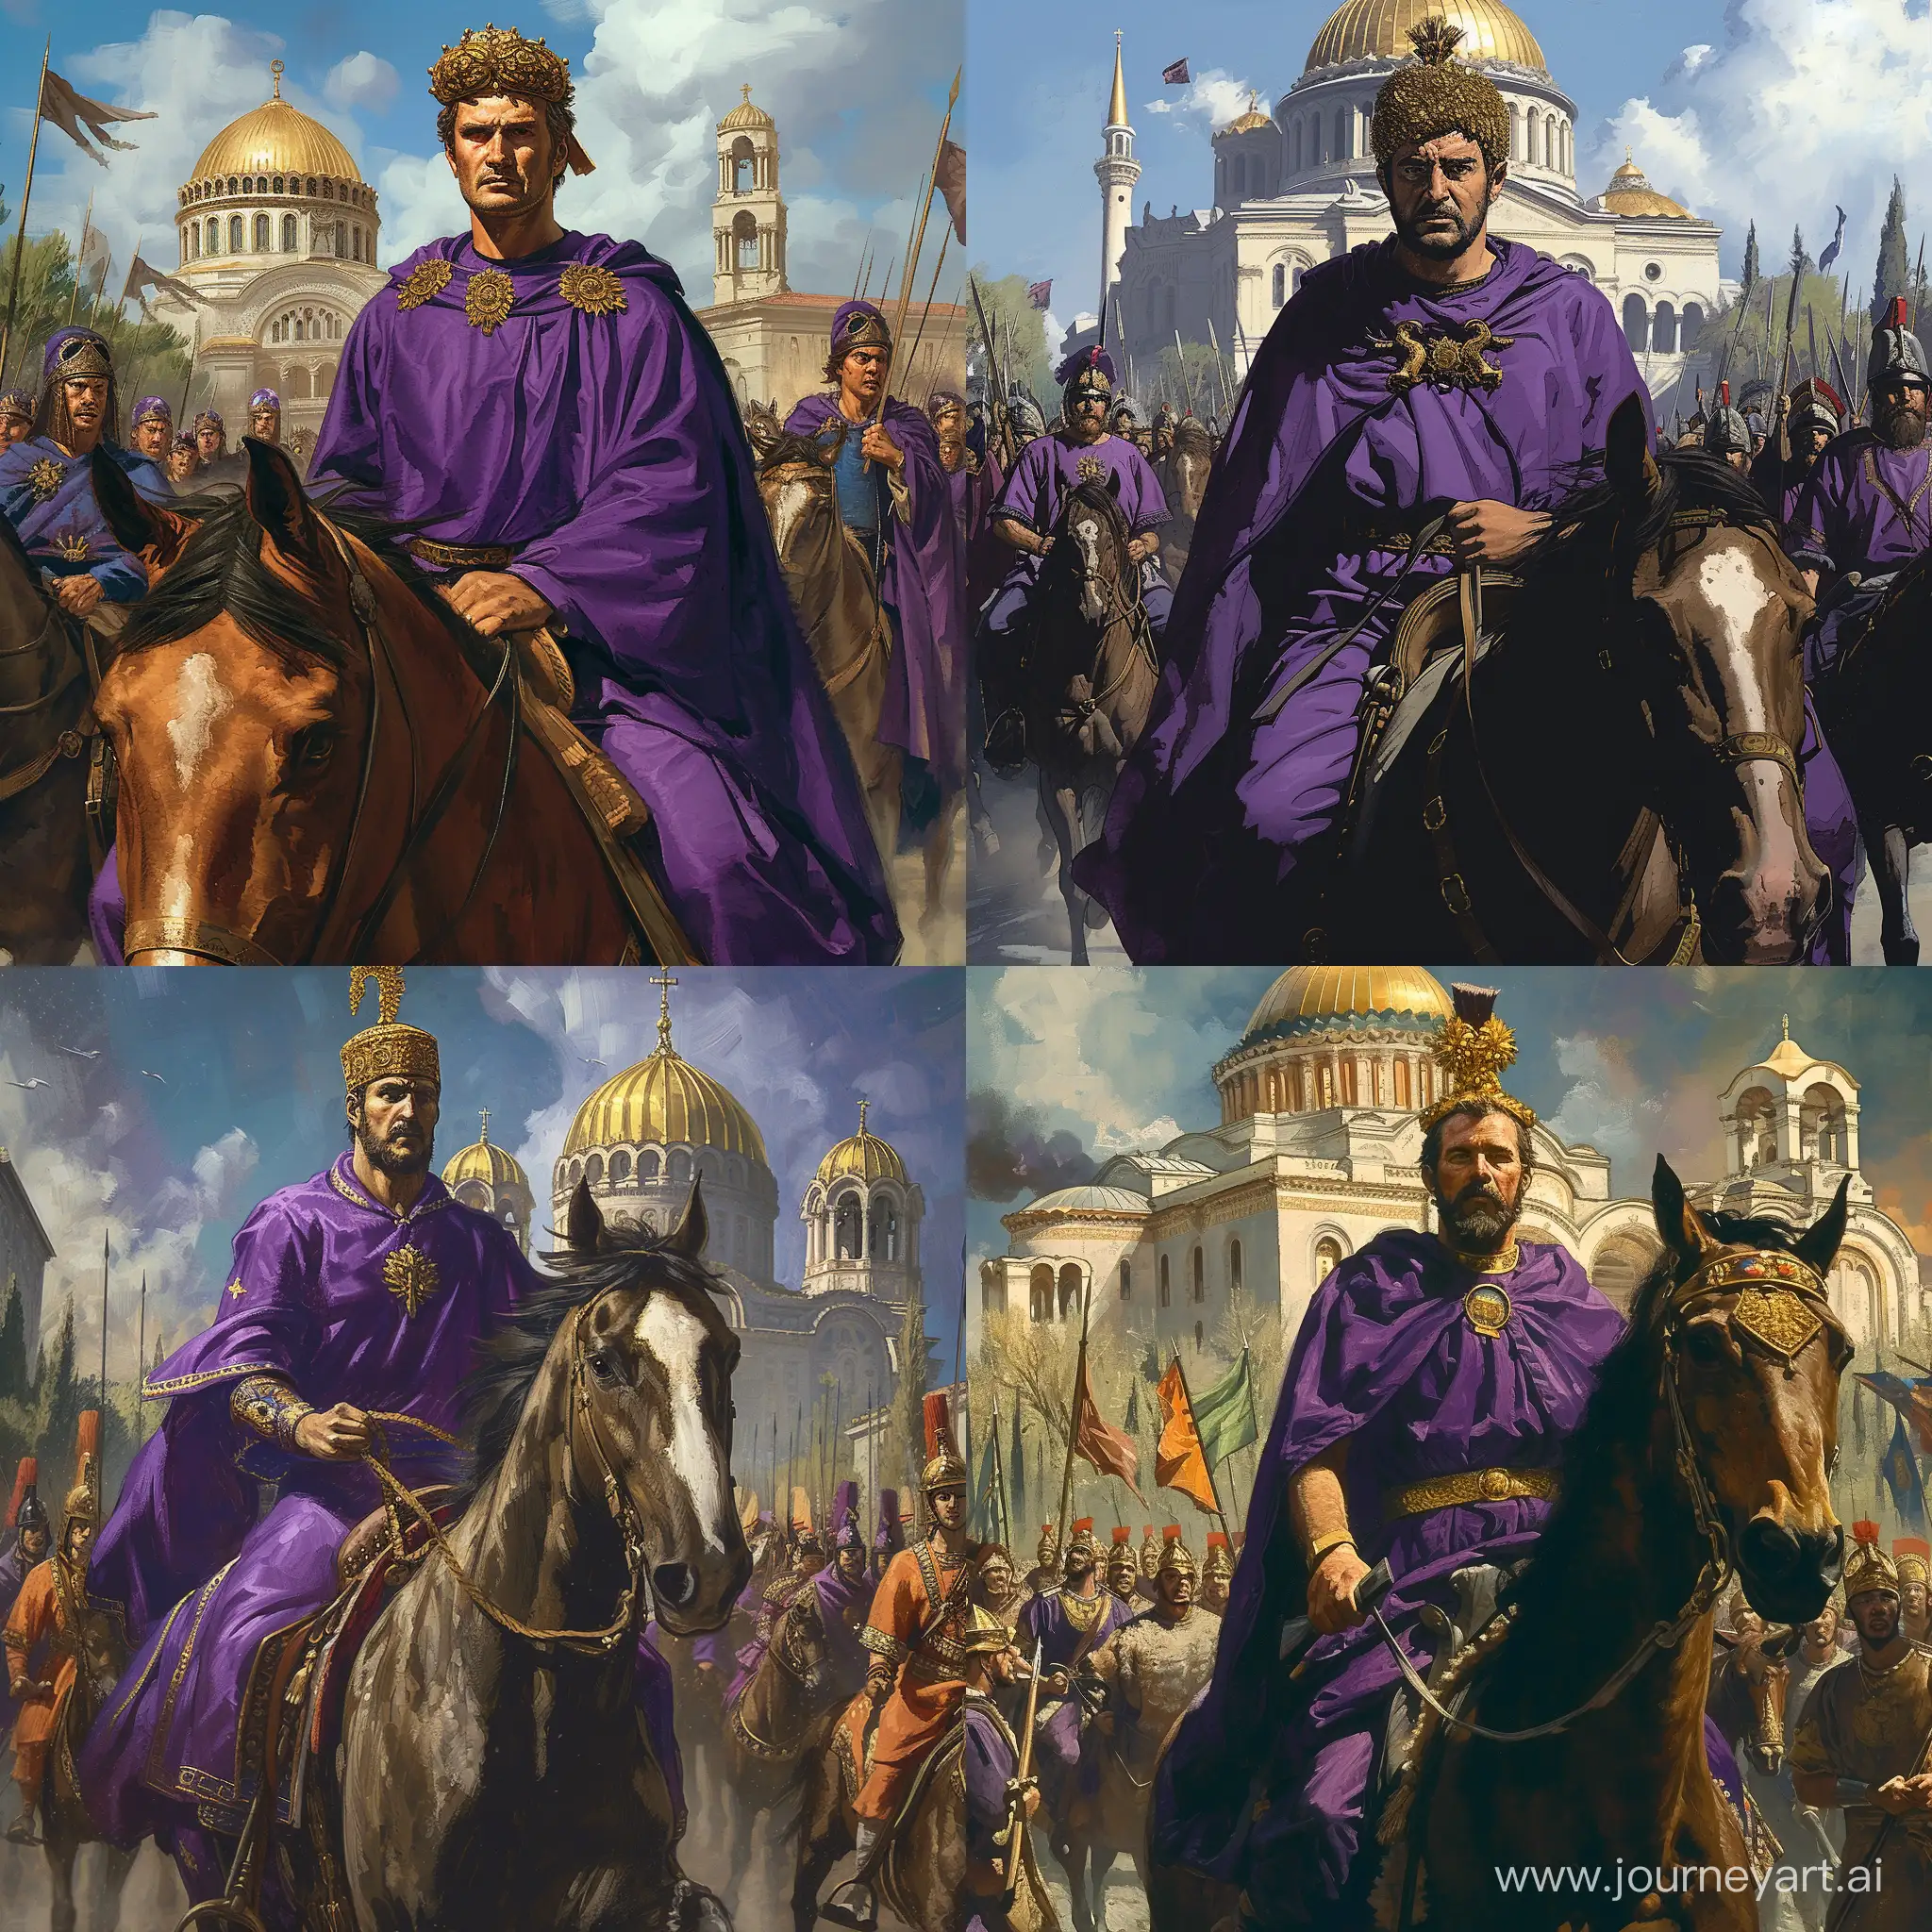 triumph in Byzantium. Basileus in purple with a golden wreath on his head rides a horse in front of his army. against the background of St. Sophia Cathedral